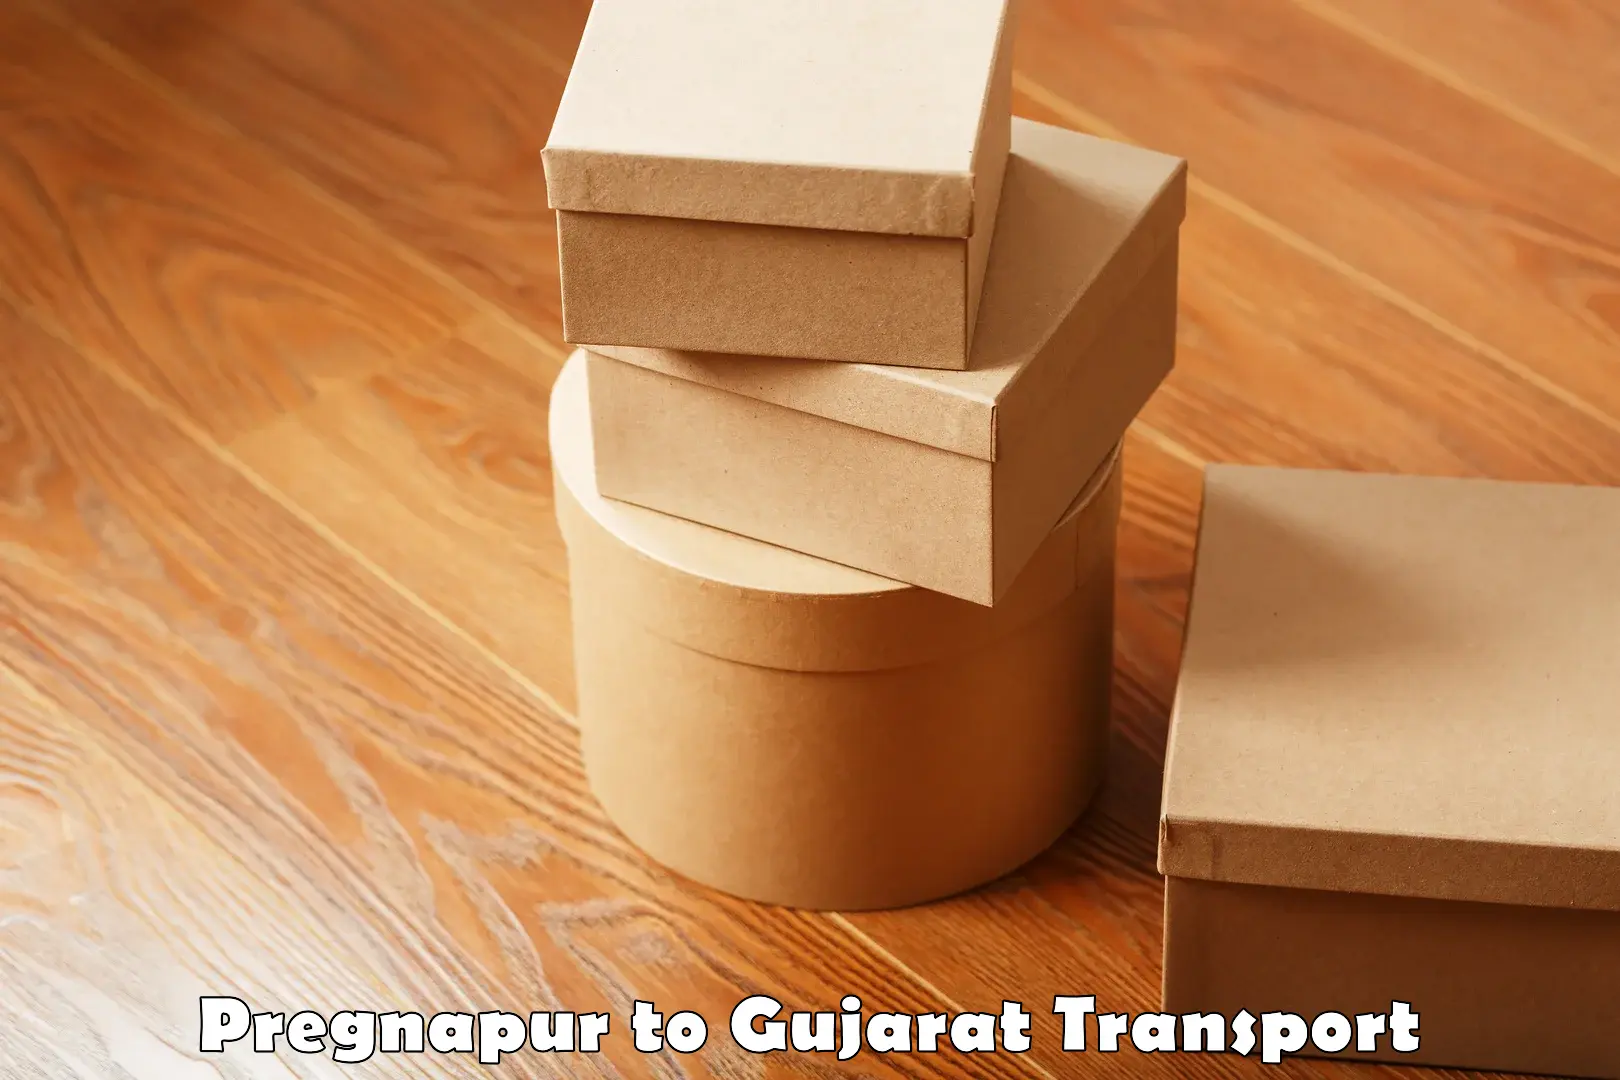 Best transport services in India Pregnapur to GIDC